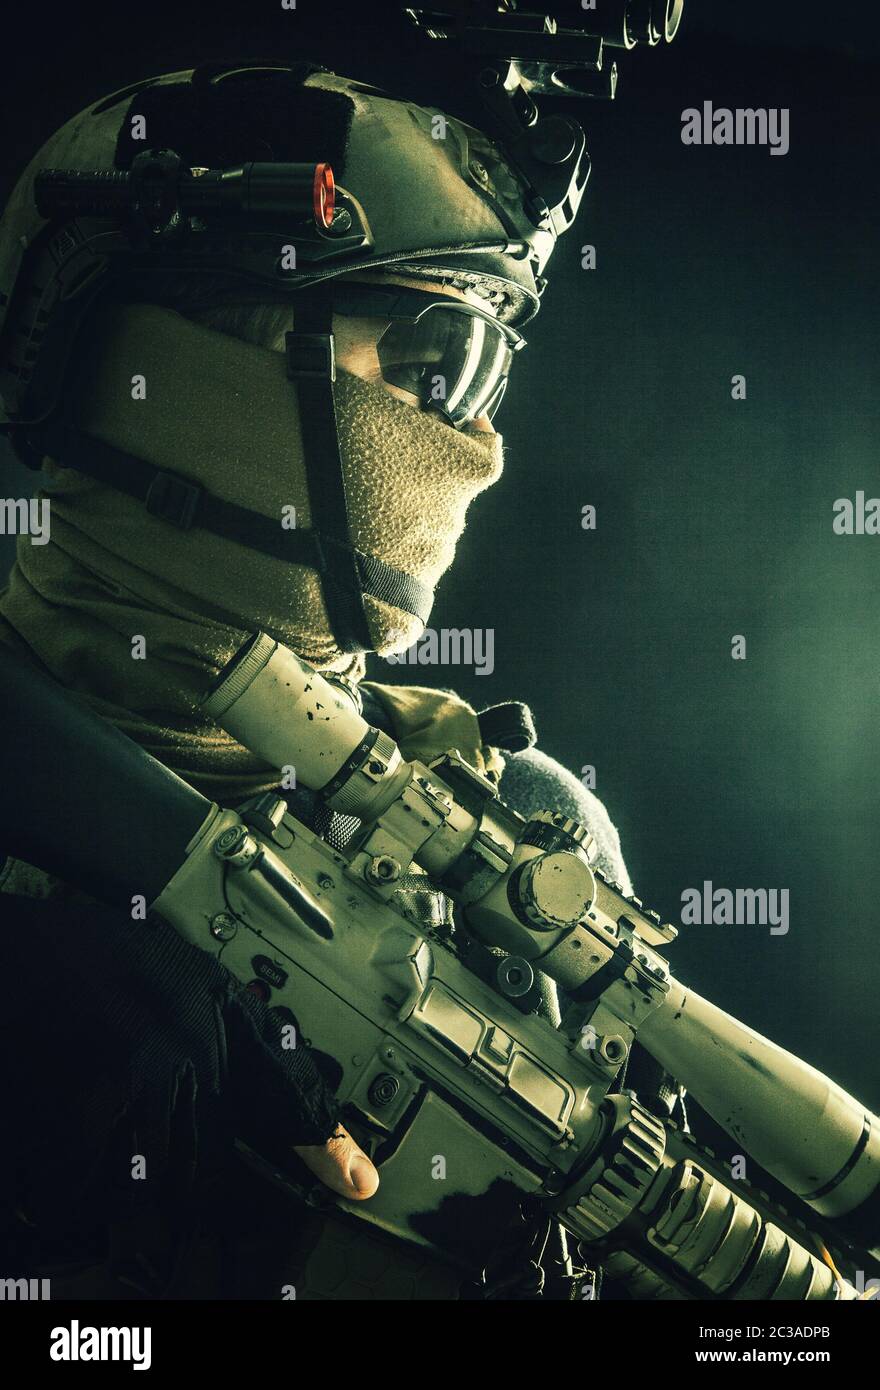 Shoulder portrait of army elite troops sniper, anti-terrorist tactical team marksman wearing helmet with thermal imager, hiding face behind mask, arme Stock Photo